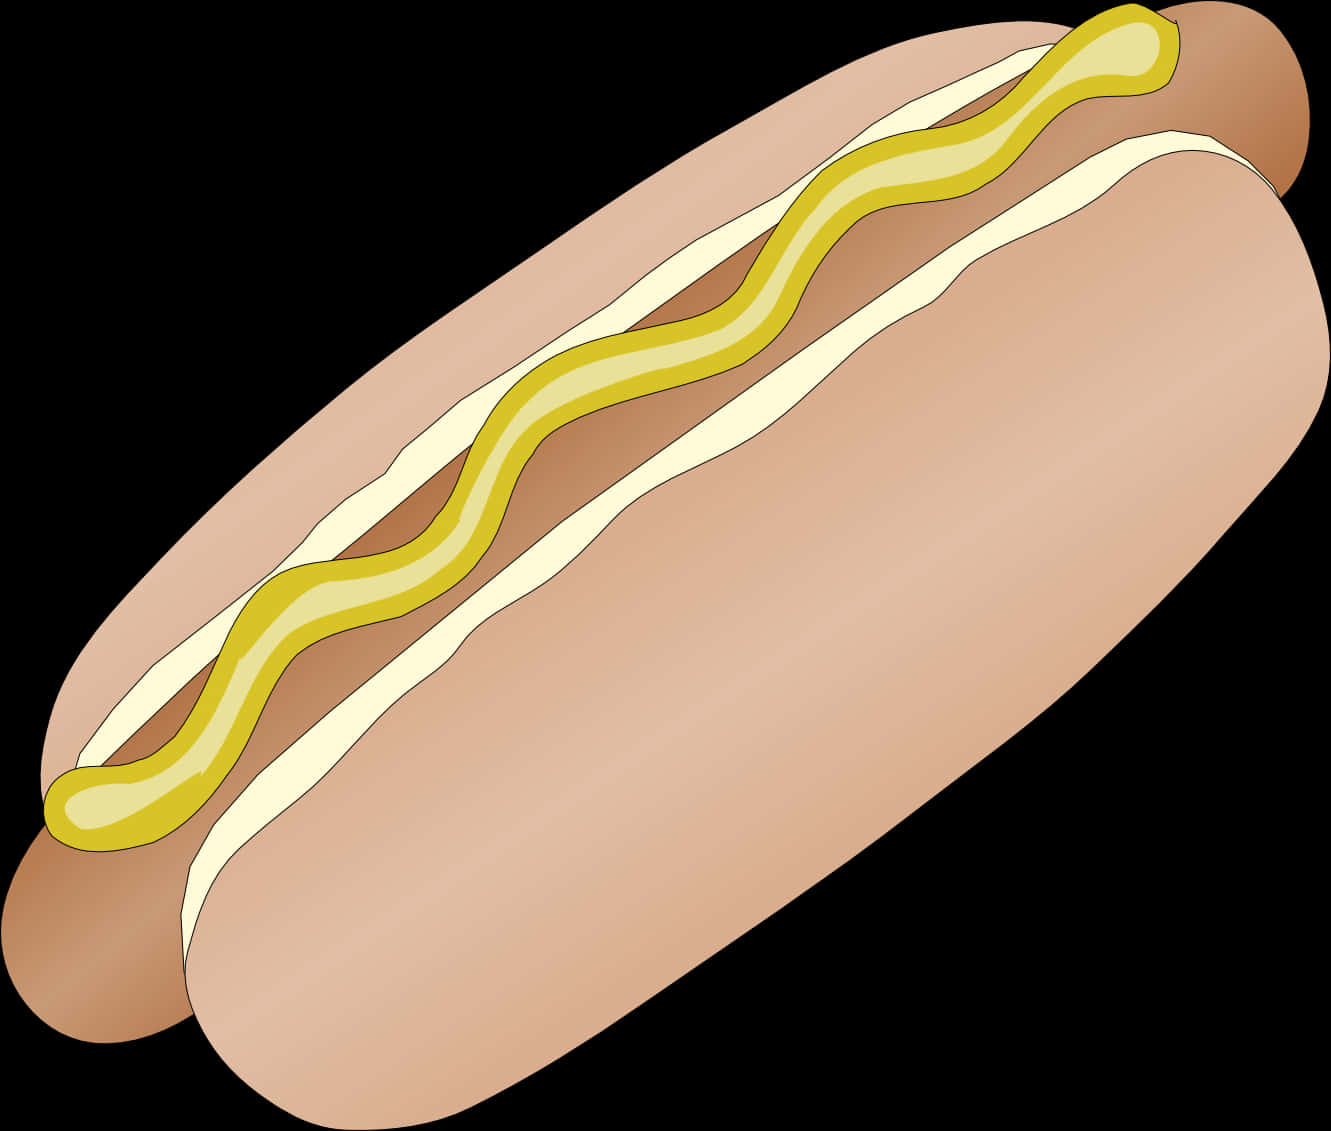 Classic Hot Dog With Mustard Illustration PNG